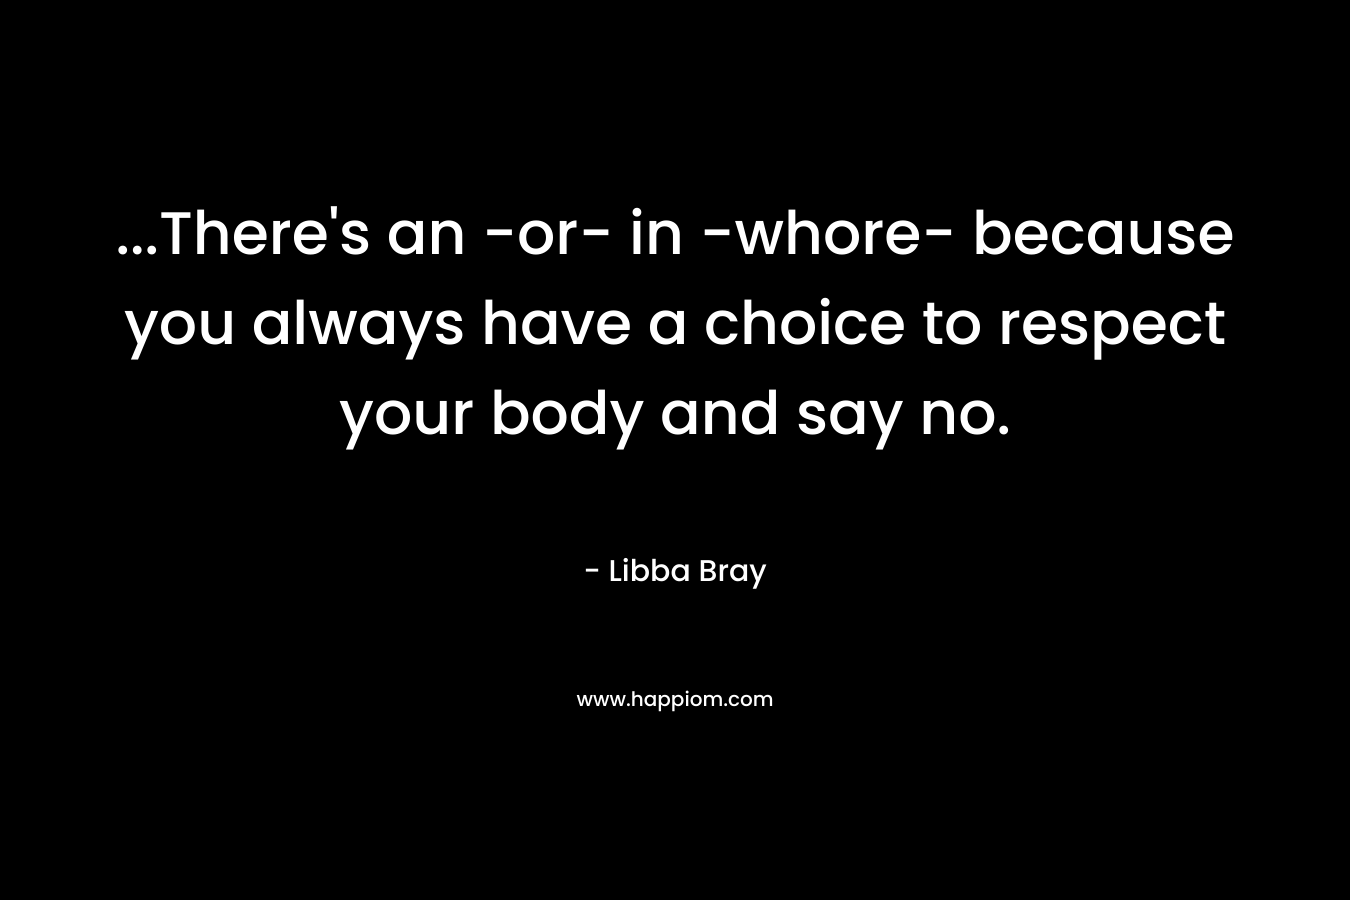 ...There's an -or- in -whore- because you always have a choice to respect your body and say no.